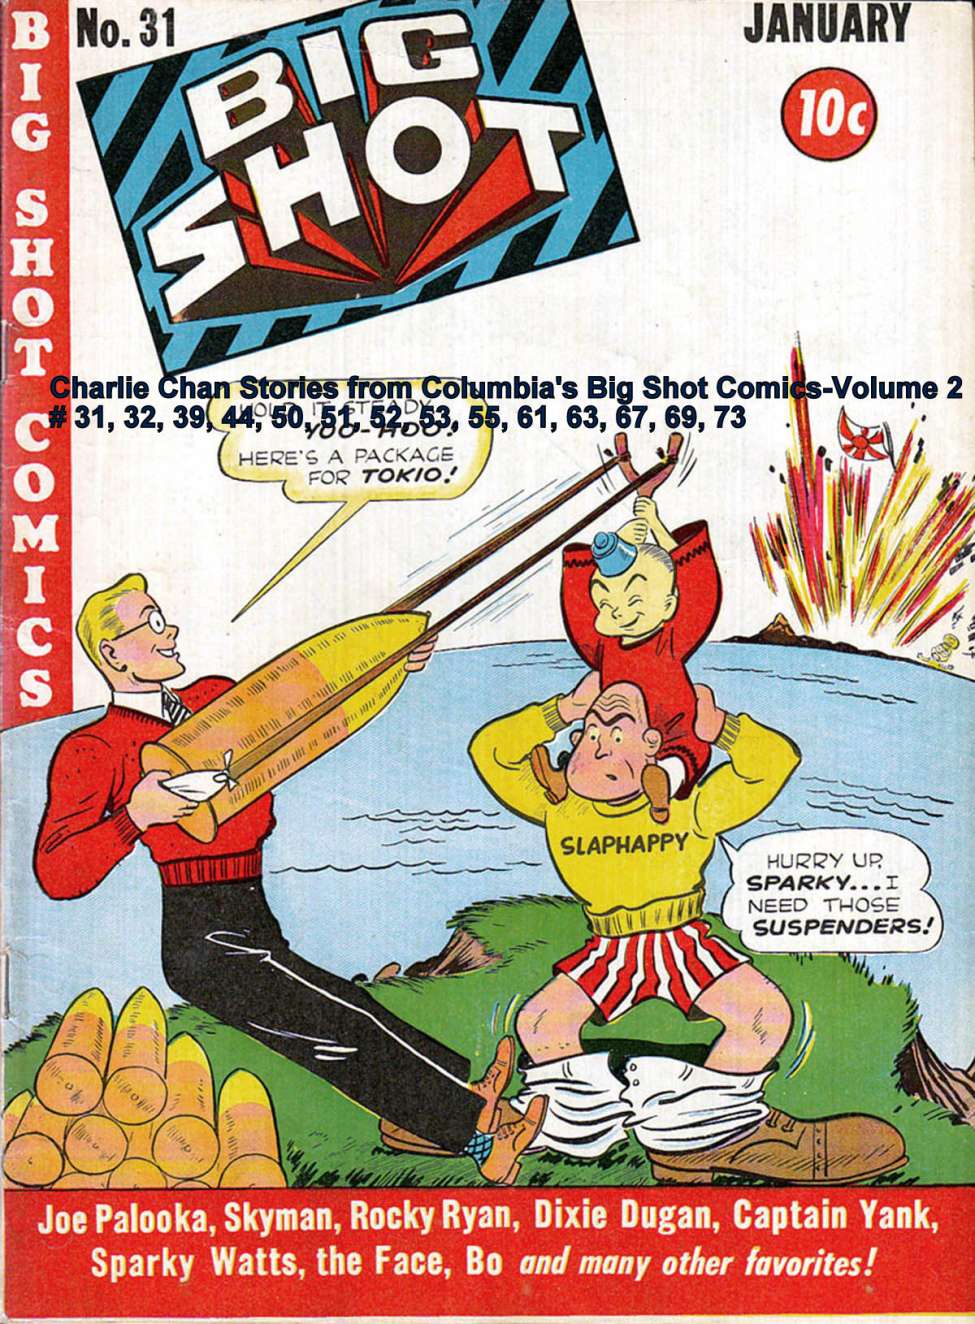 Comic Book Cover For Charlie Chan Stories from Columbia's Big Shot Comics-Volume 2